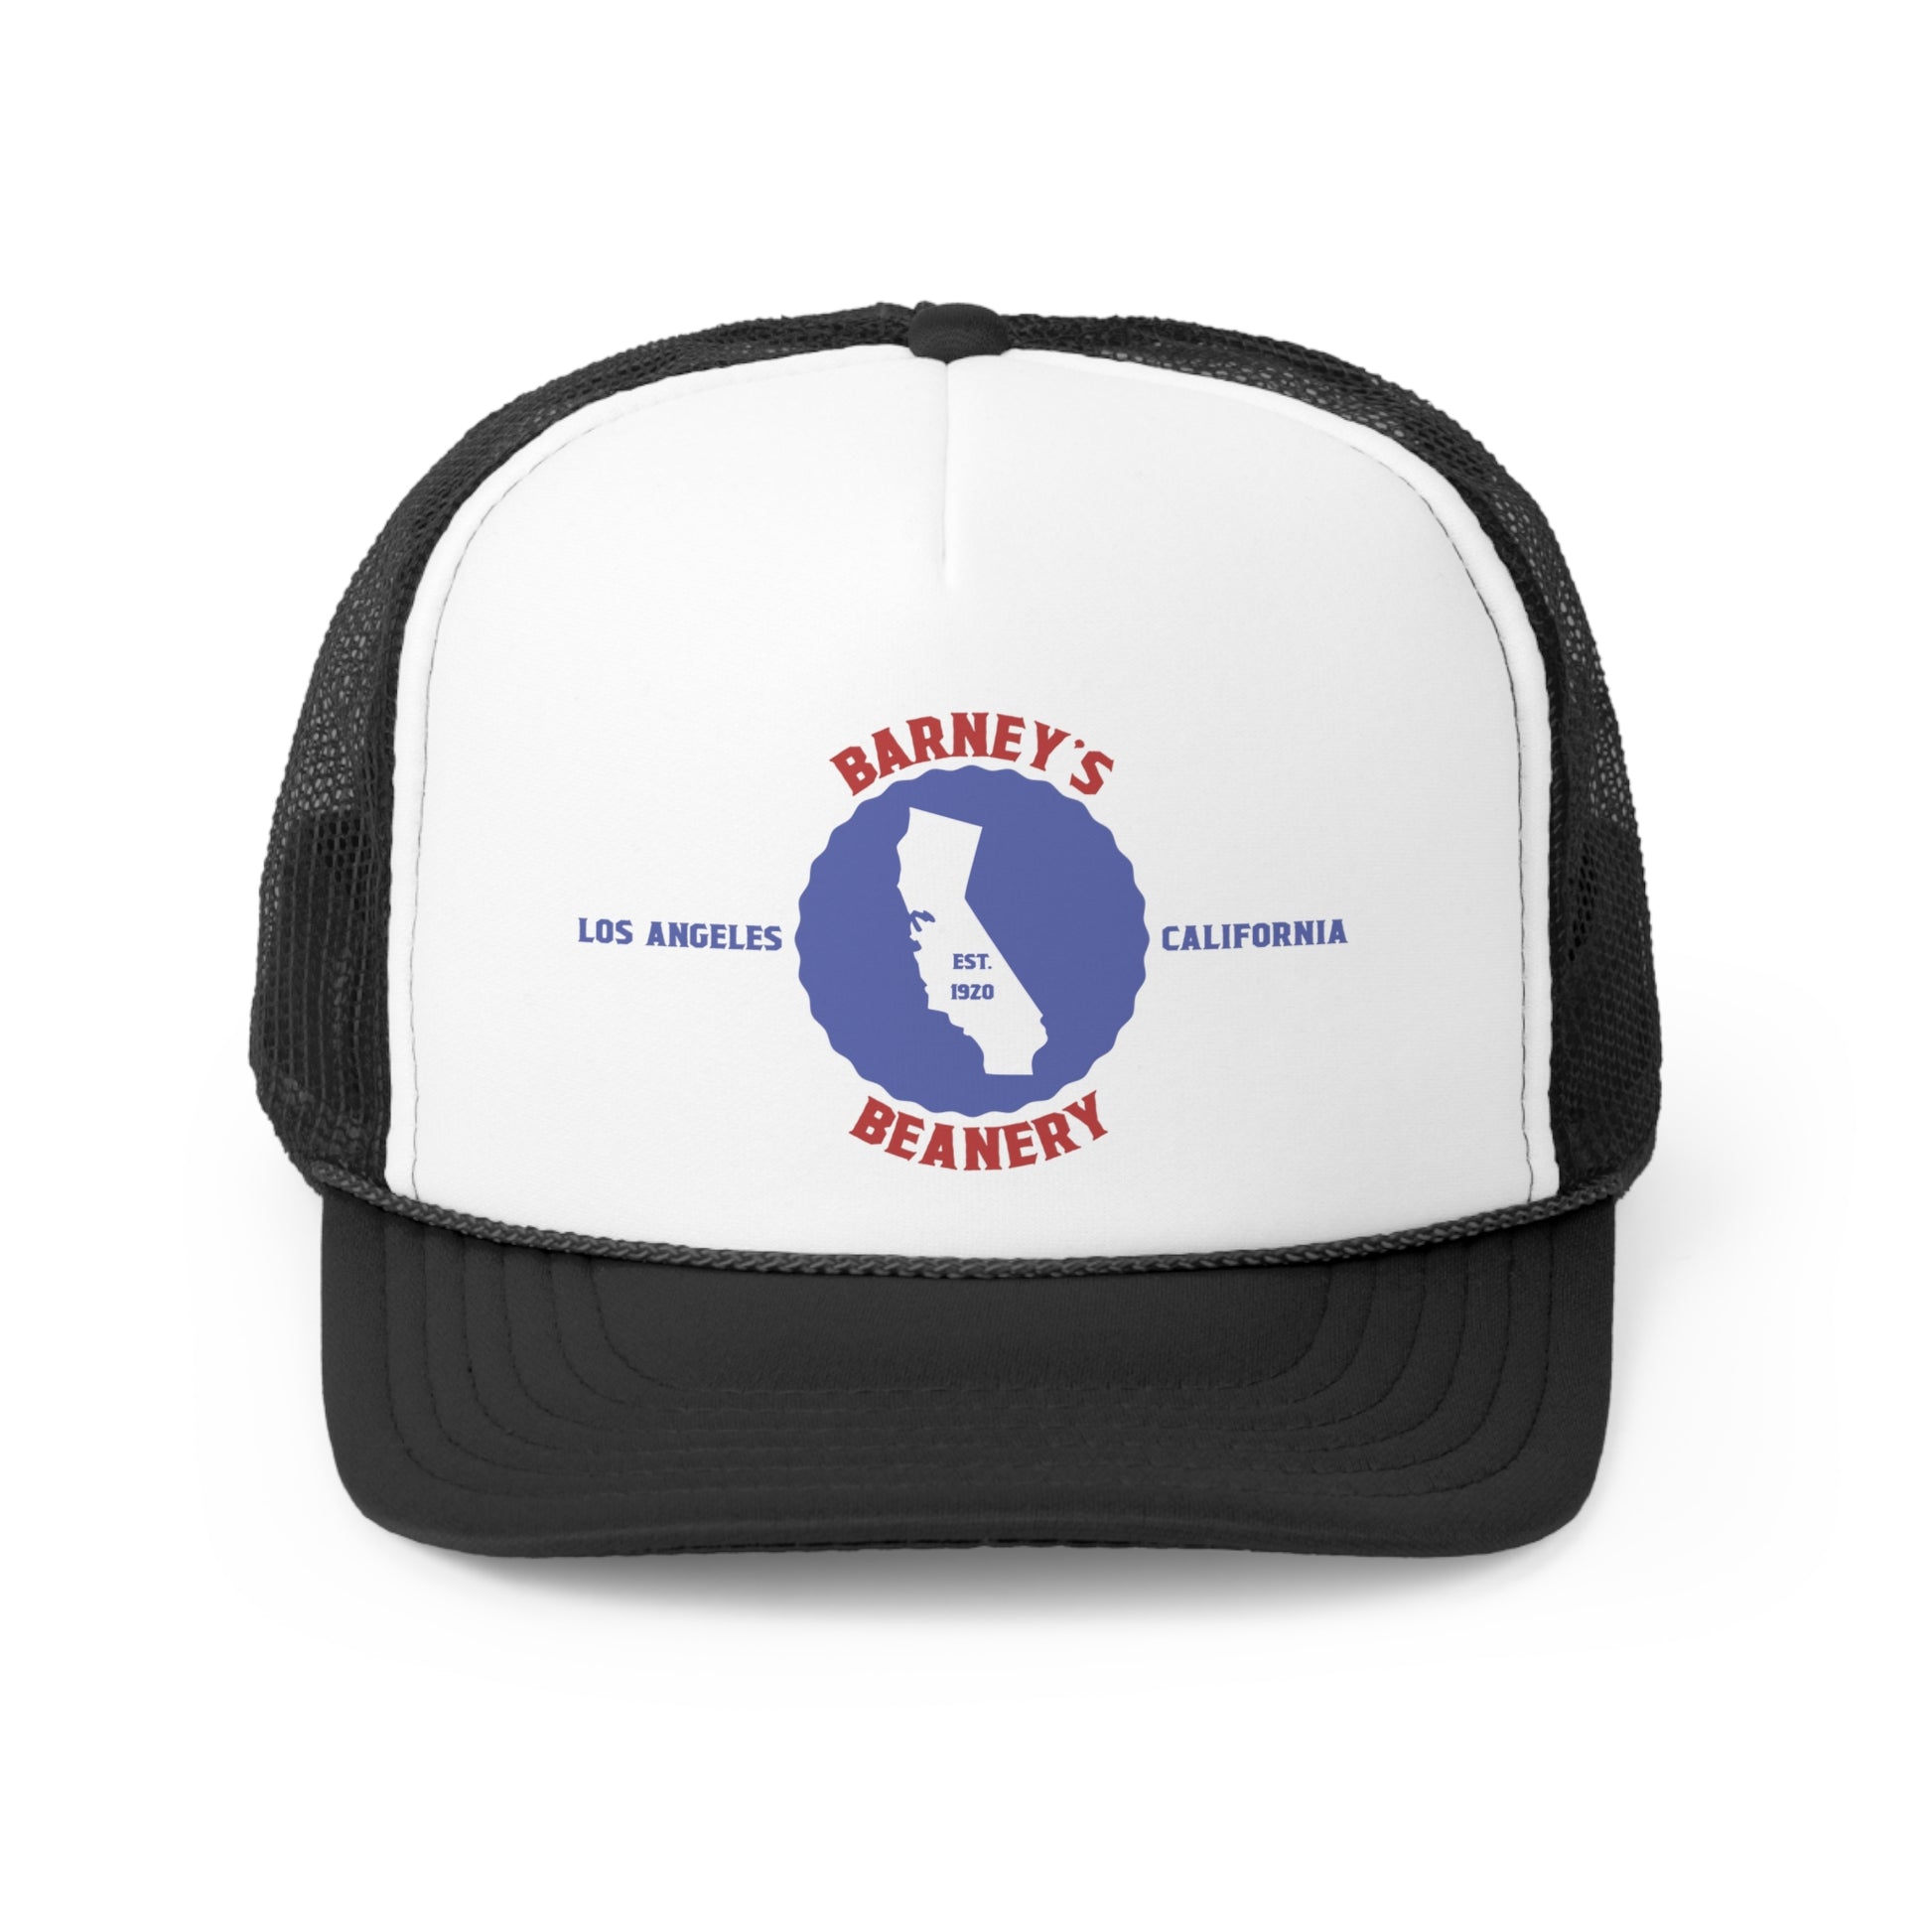 California Badge | BARNEY'S BEANERY - Trucker Hat | Red And Blue Graphic On Black And White Trucker Hat, Front View